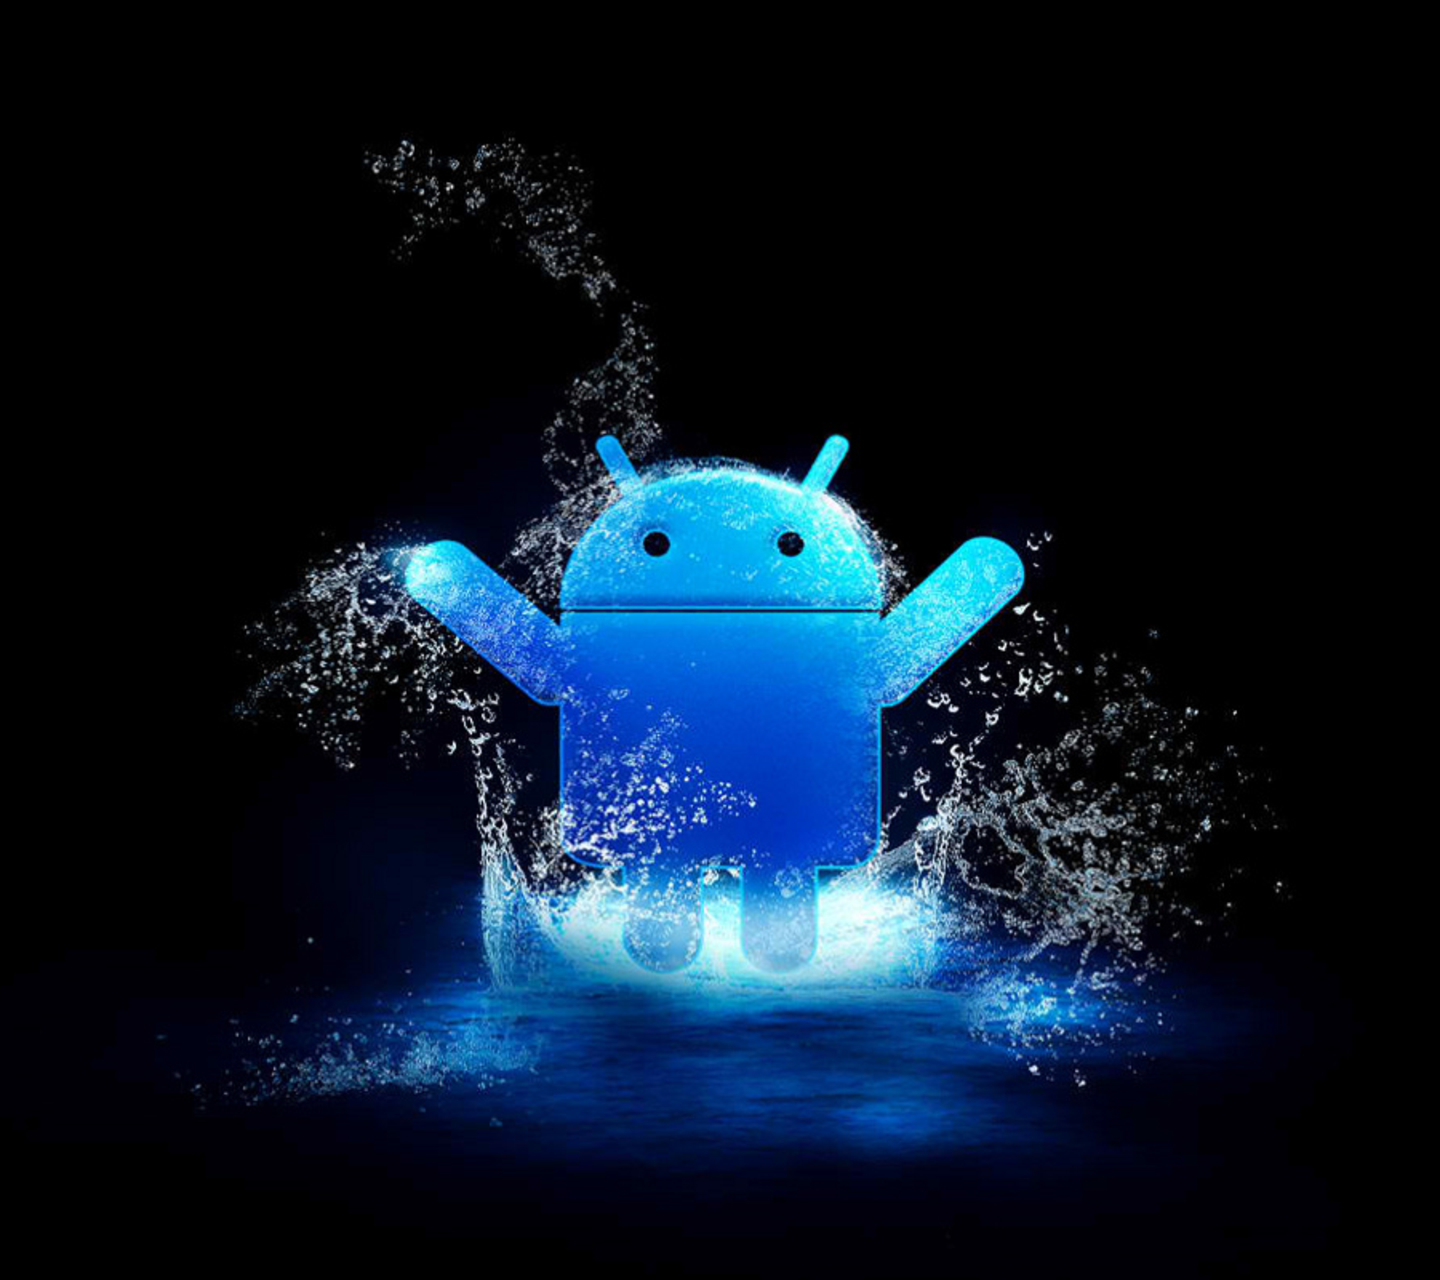 Image Wallpaper Galaxy S3 New Background